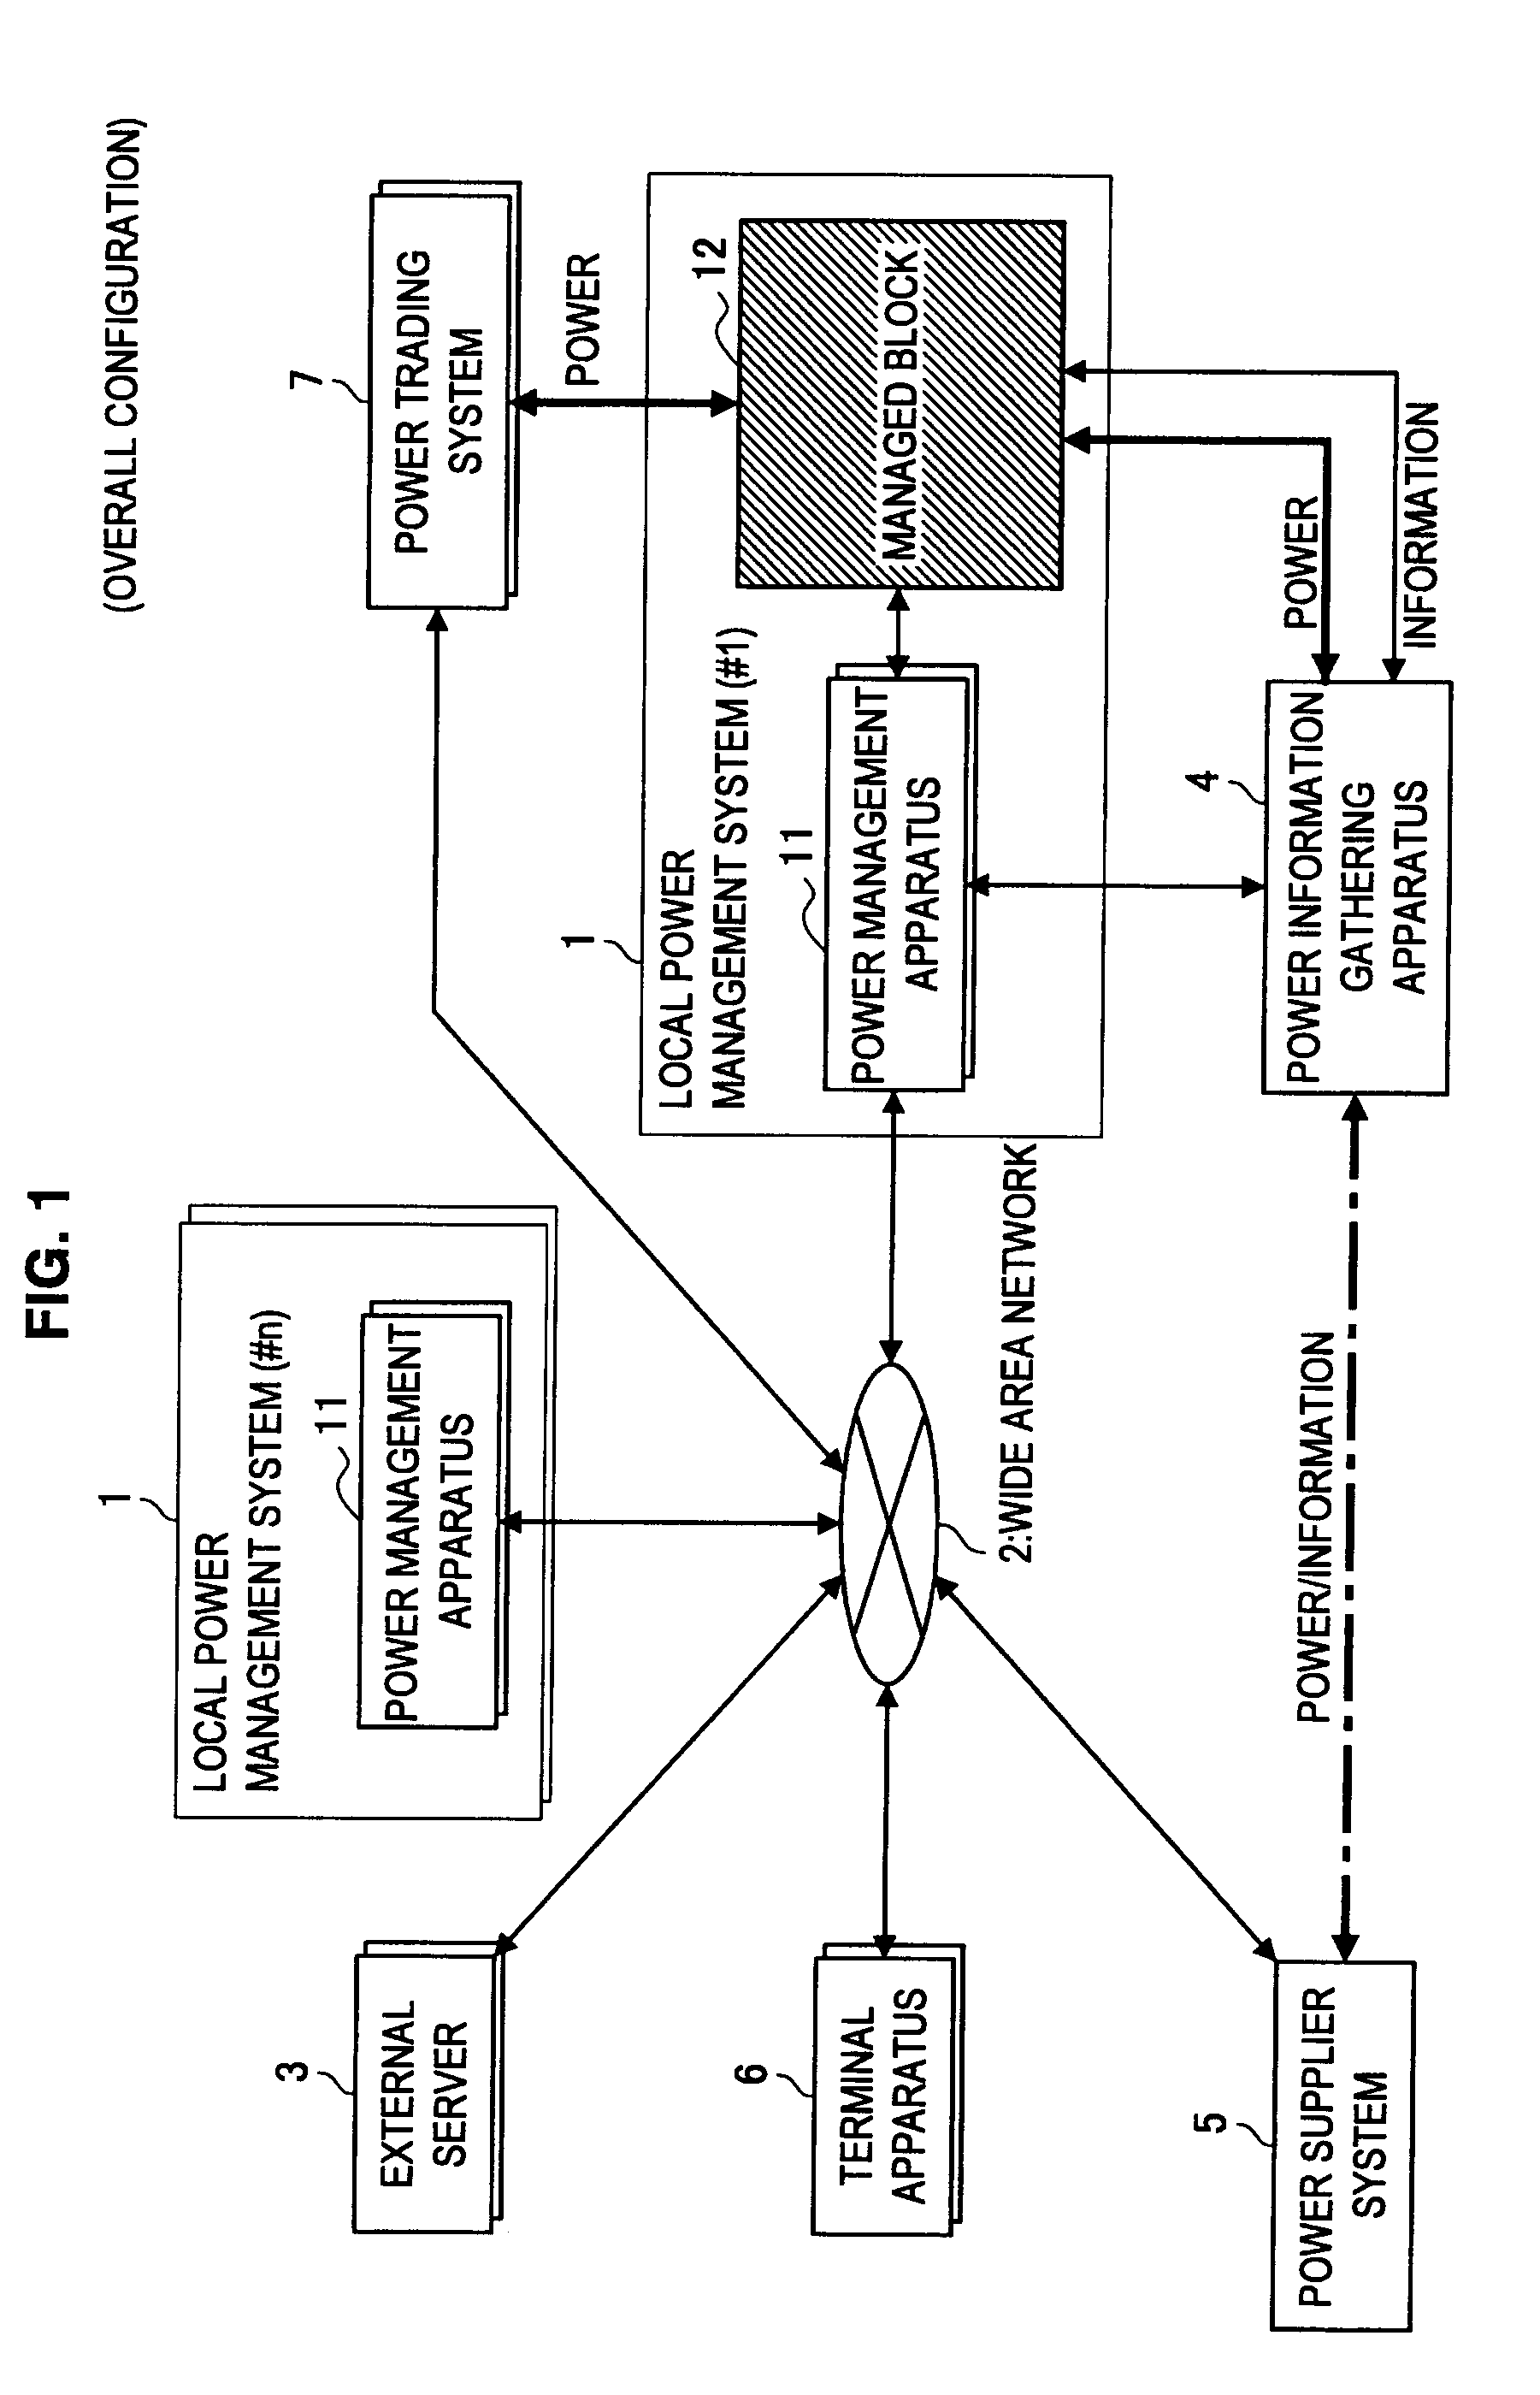 Power management apparatus, and display method